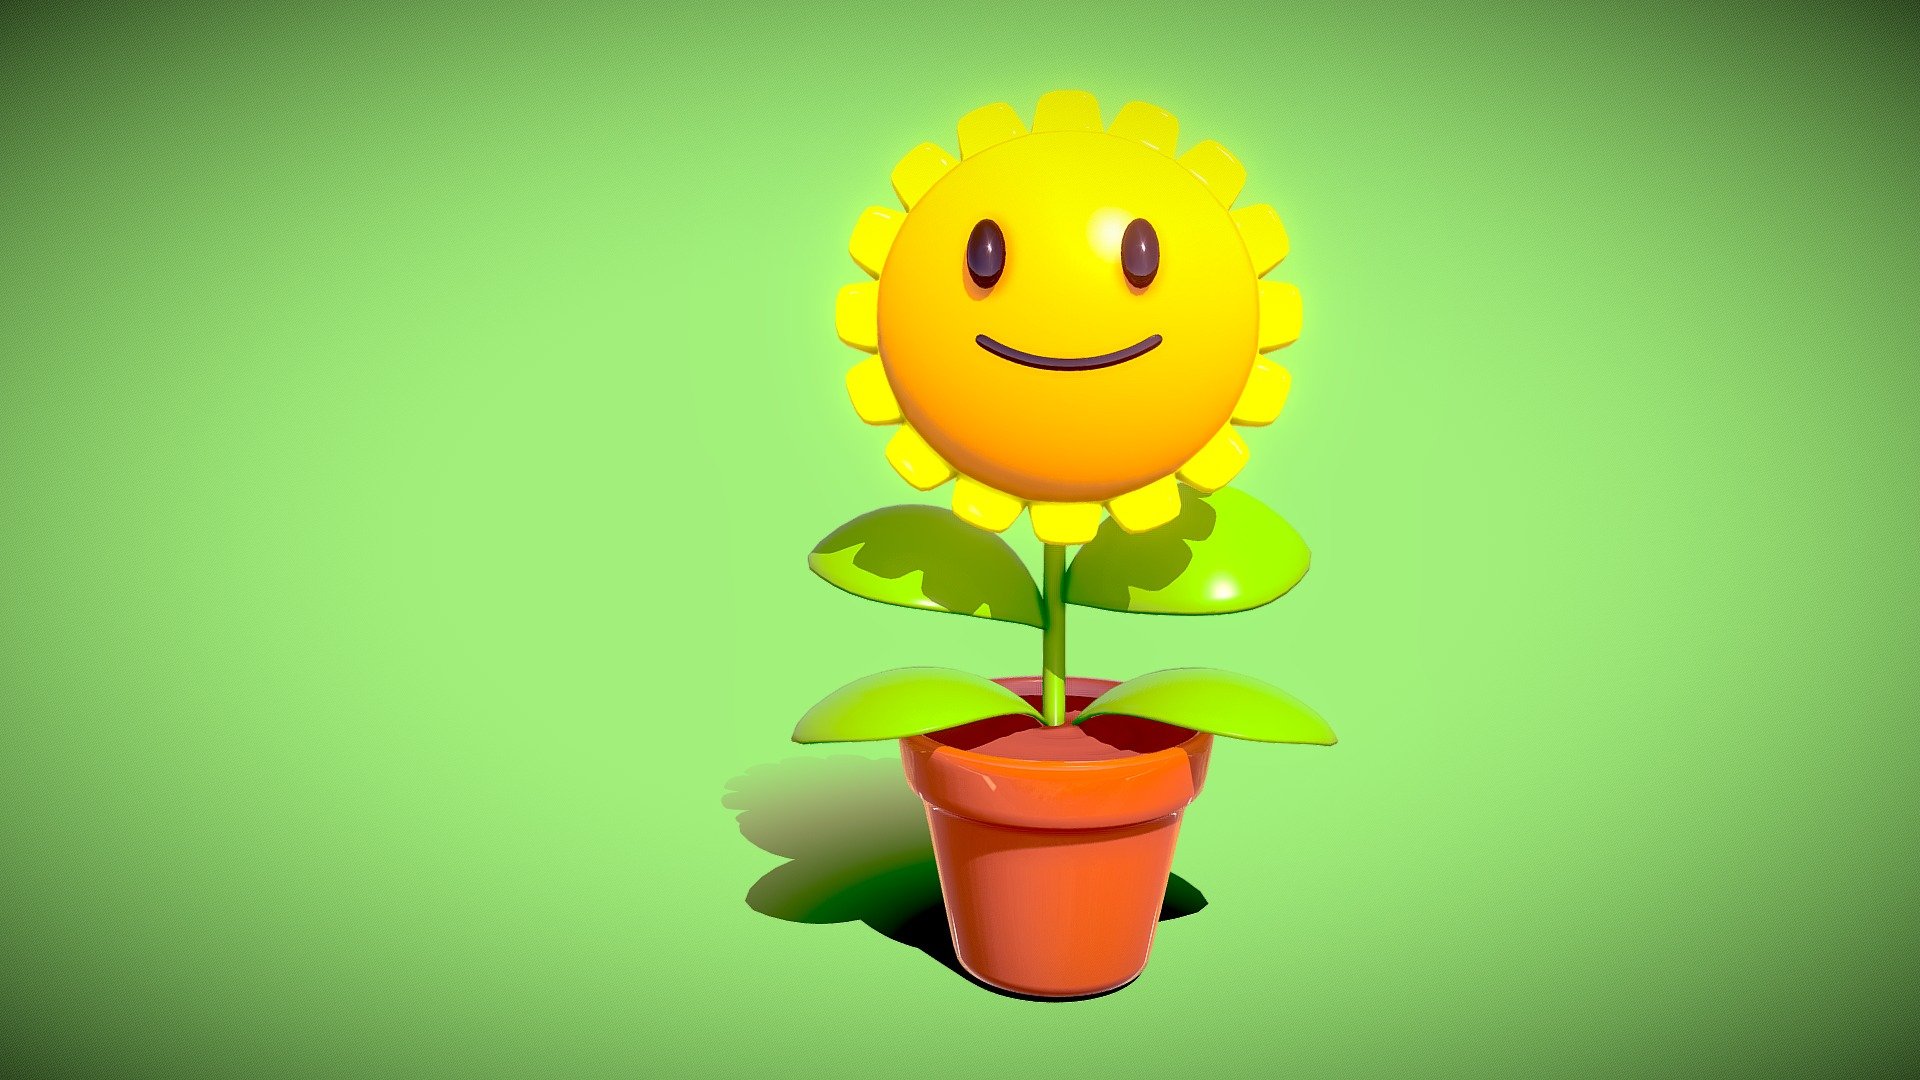 Sketchfab 3December 2020 Challenge!!!

15th DAY-PLANT

Hello guys, I made a Sunflower of PlantVsZombie made with 3dsmax.

Hope you like it 3d model